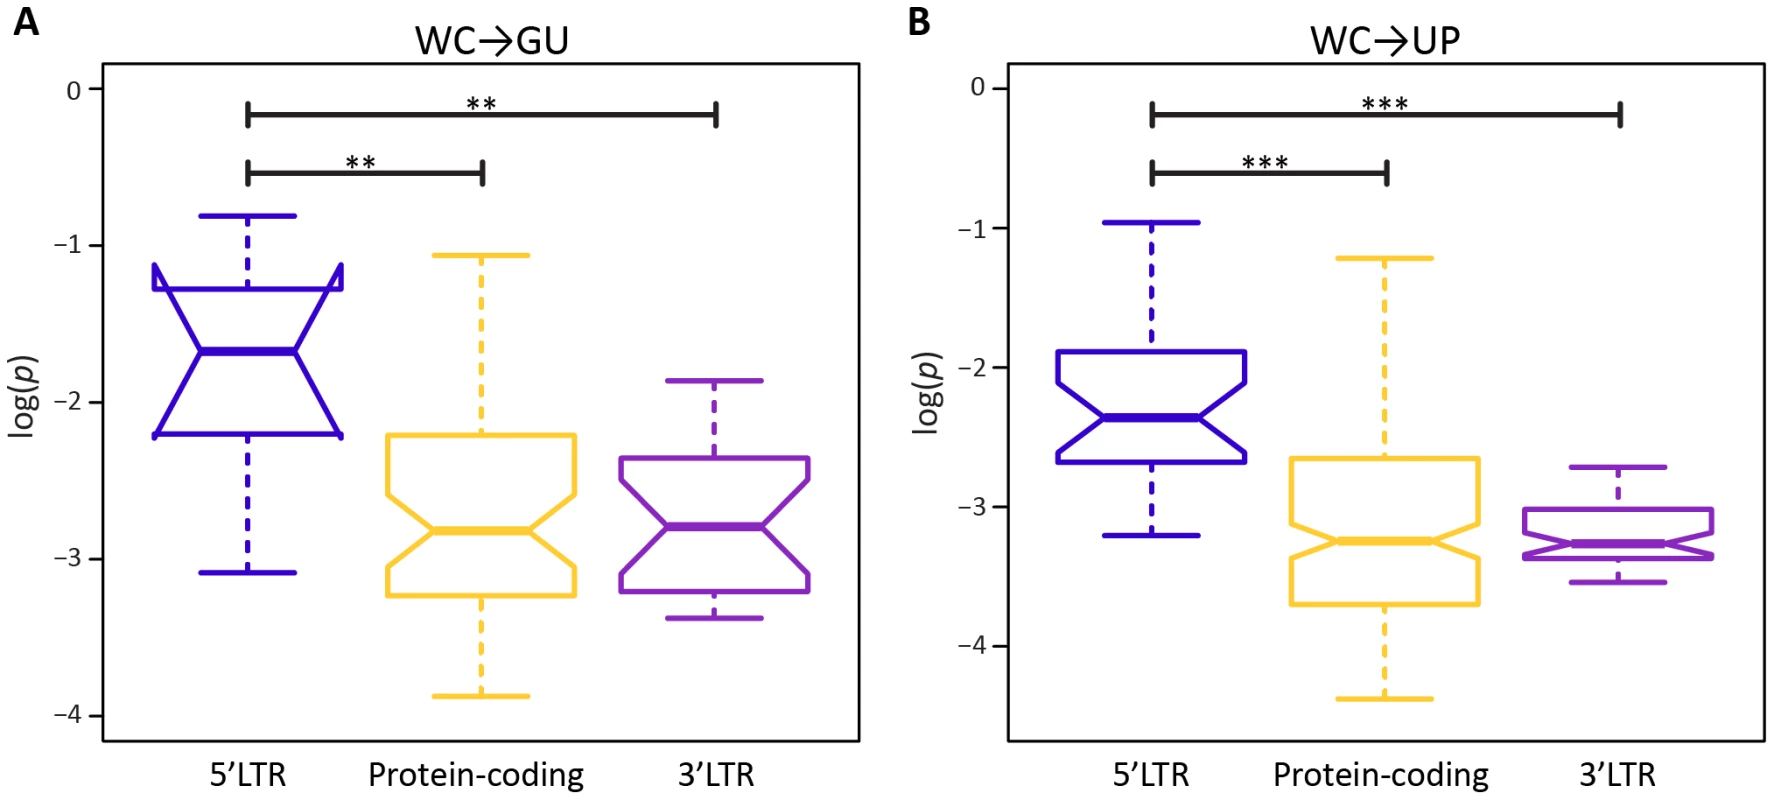 Intra-population frequencies of single-site WC replacement polymorphisms in 5′LTR, protein-coding, and 3′LTR regions of the HIV-1 genome.